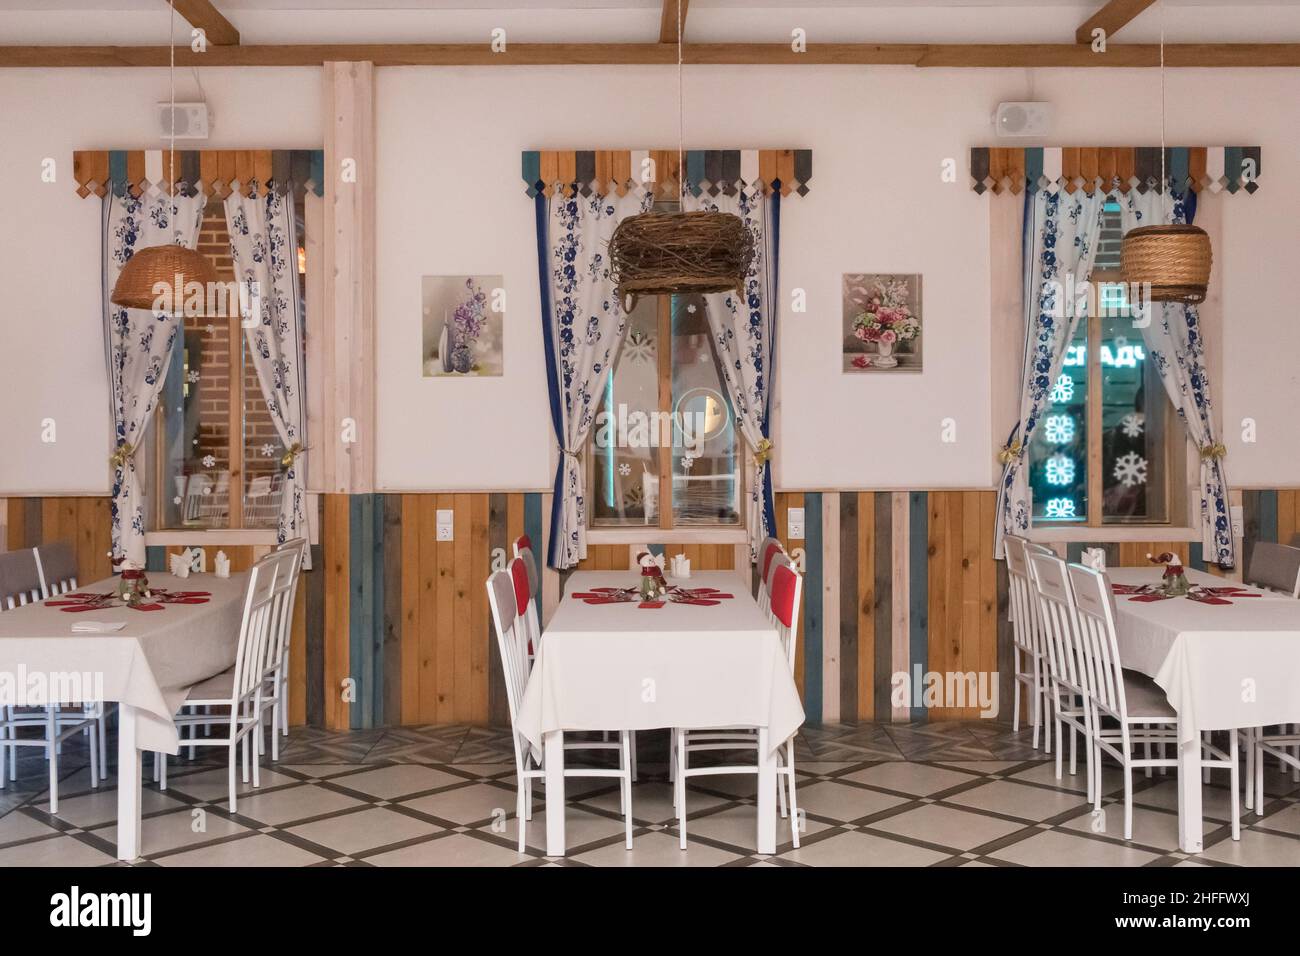 Cozy traditional restaurant interior in rural country design style. Stock Photo